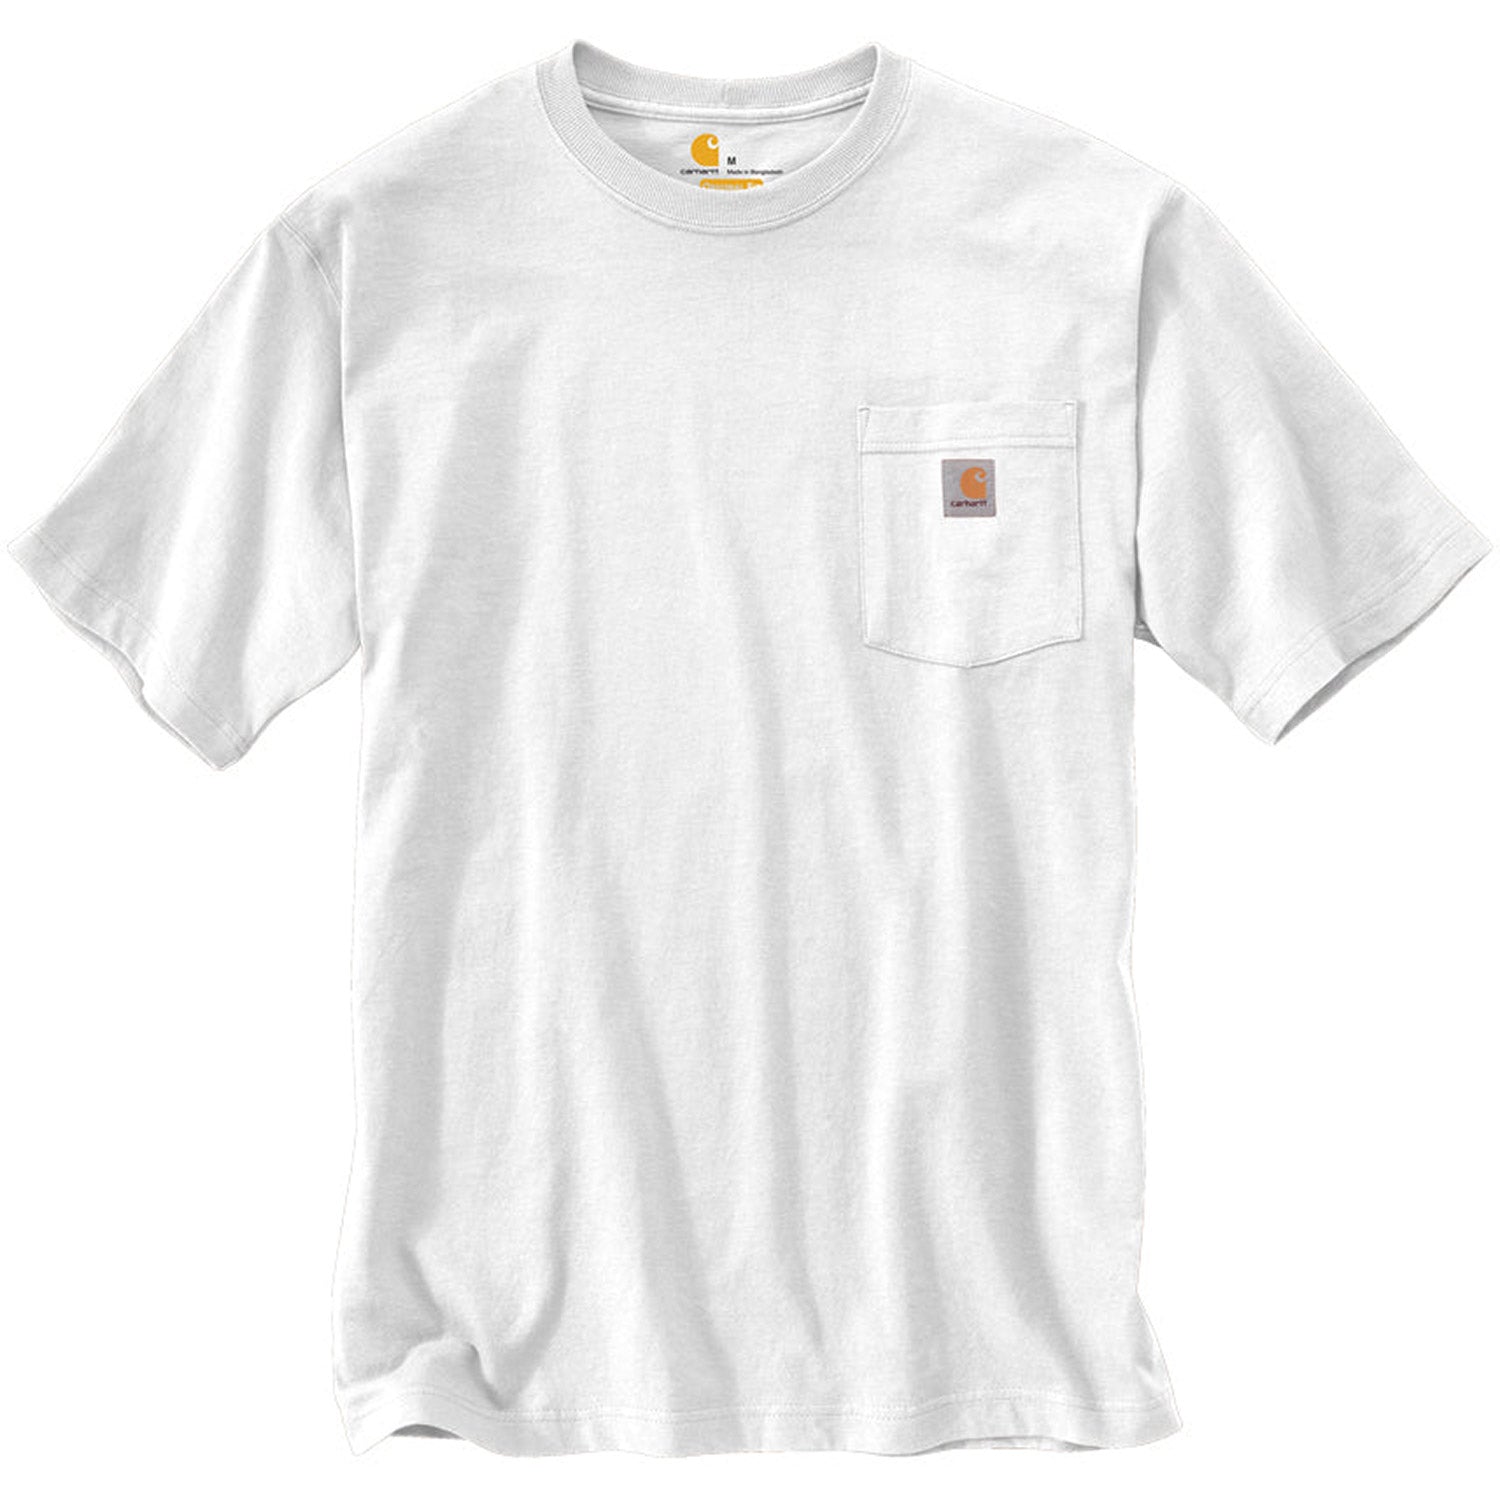 K87 - Loose Fit Heavyweight Pocket Tee, White